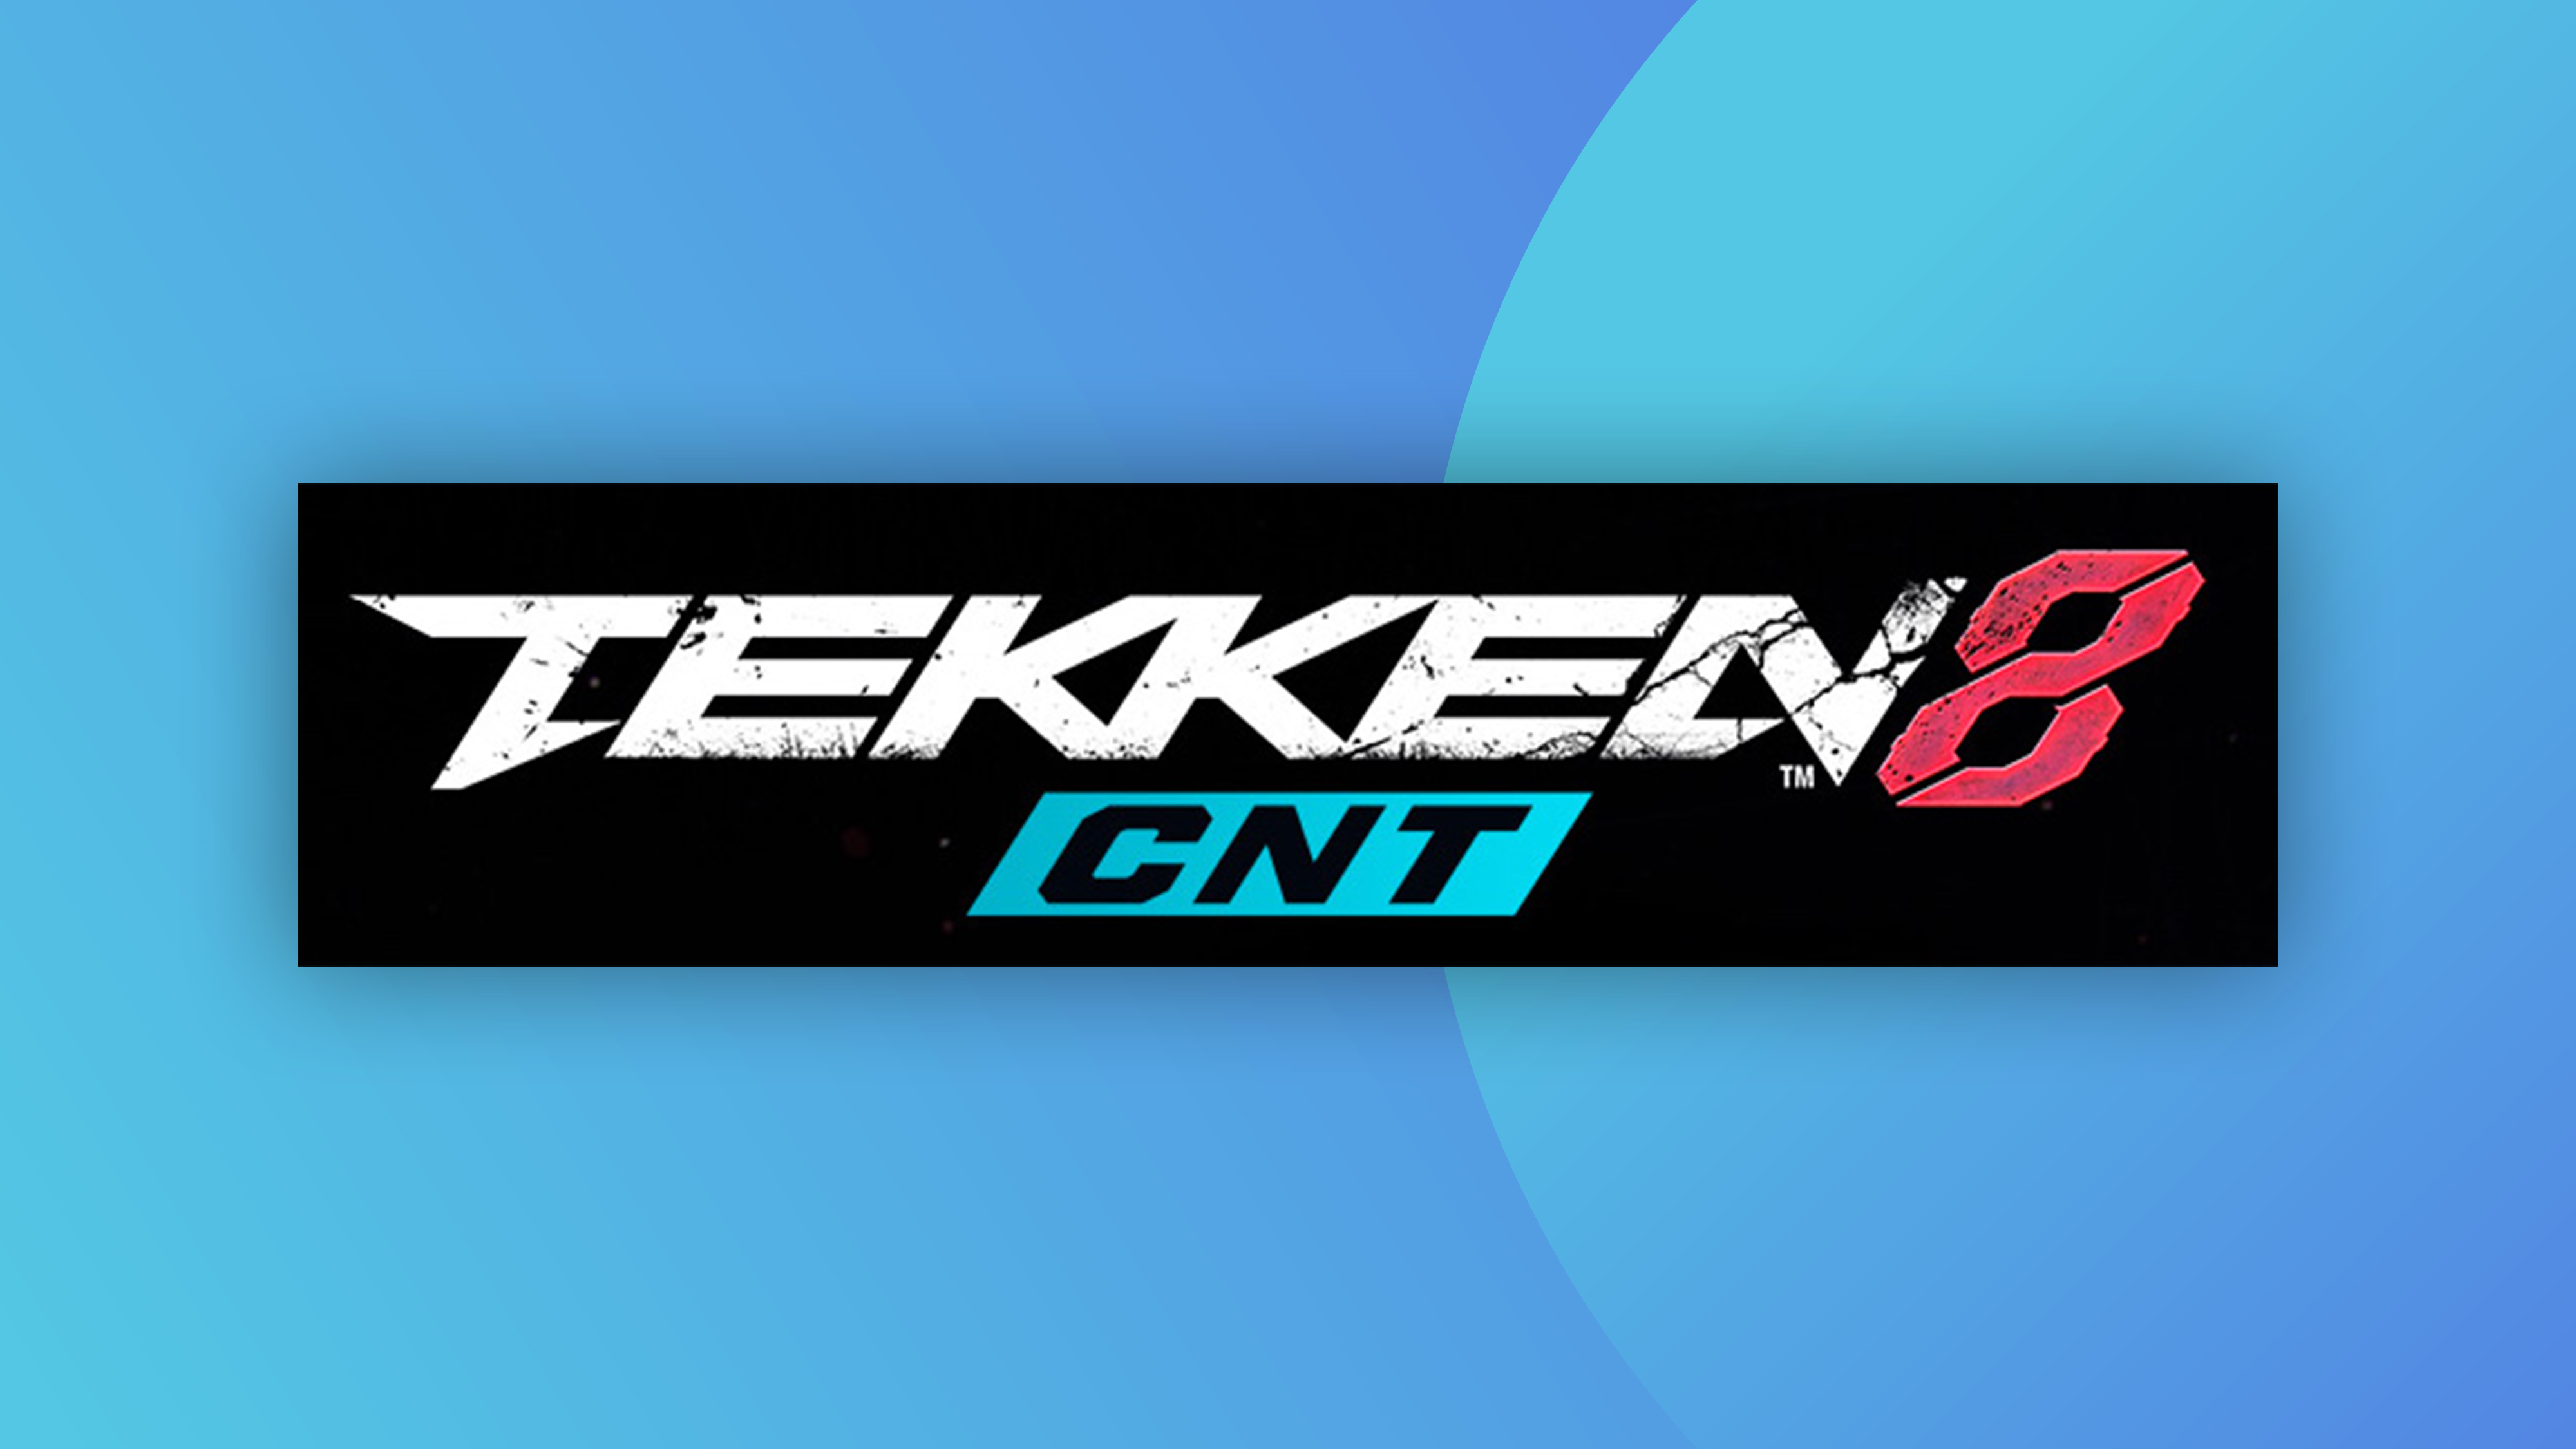 Tekken 8 CBT 2 Codes are out, check your emails